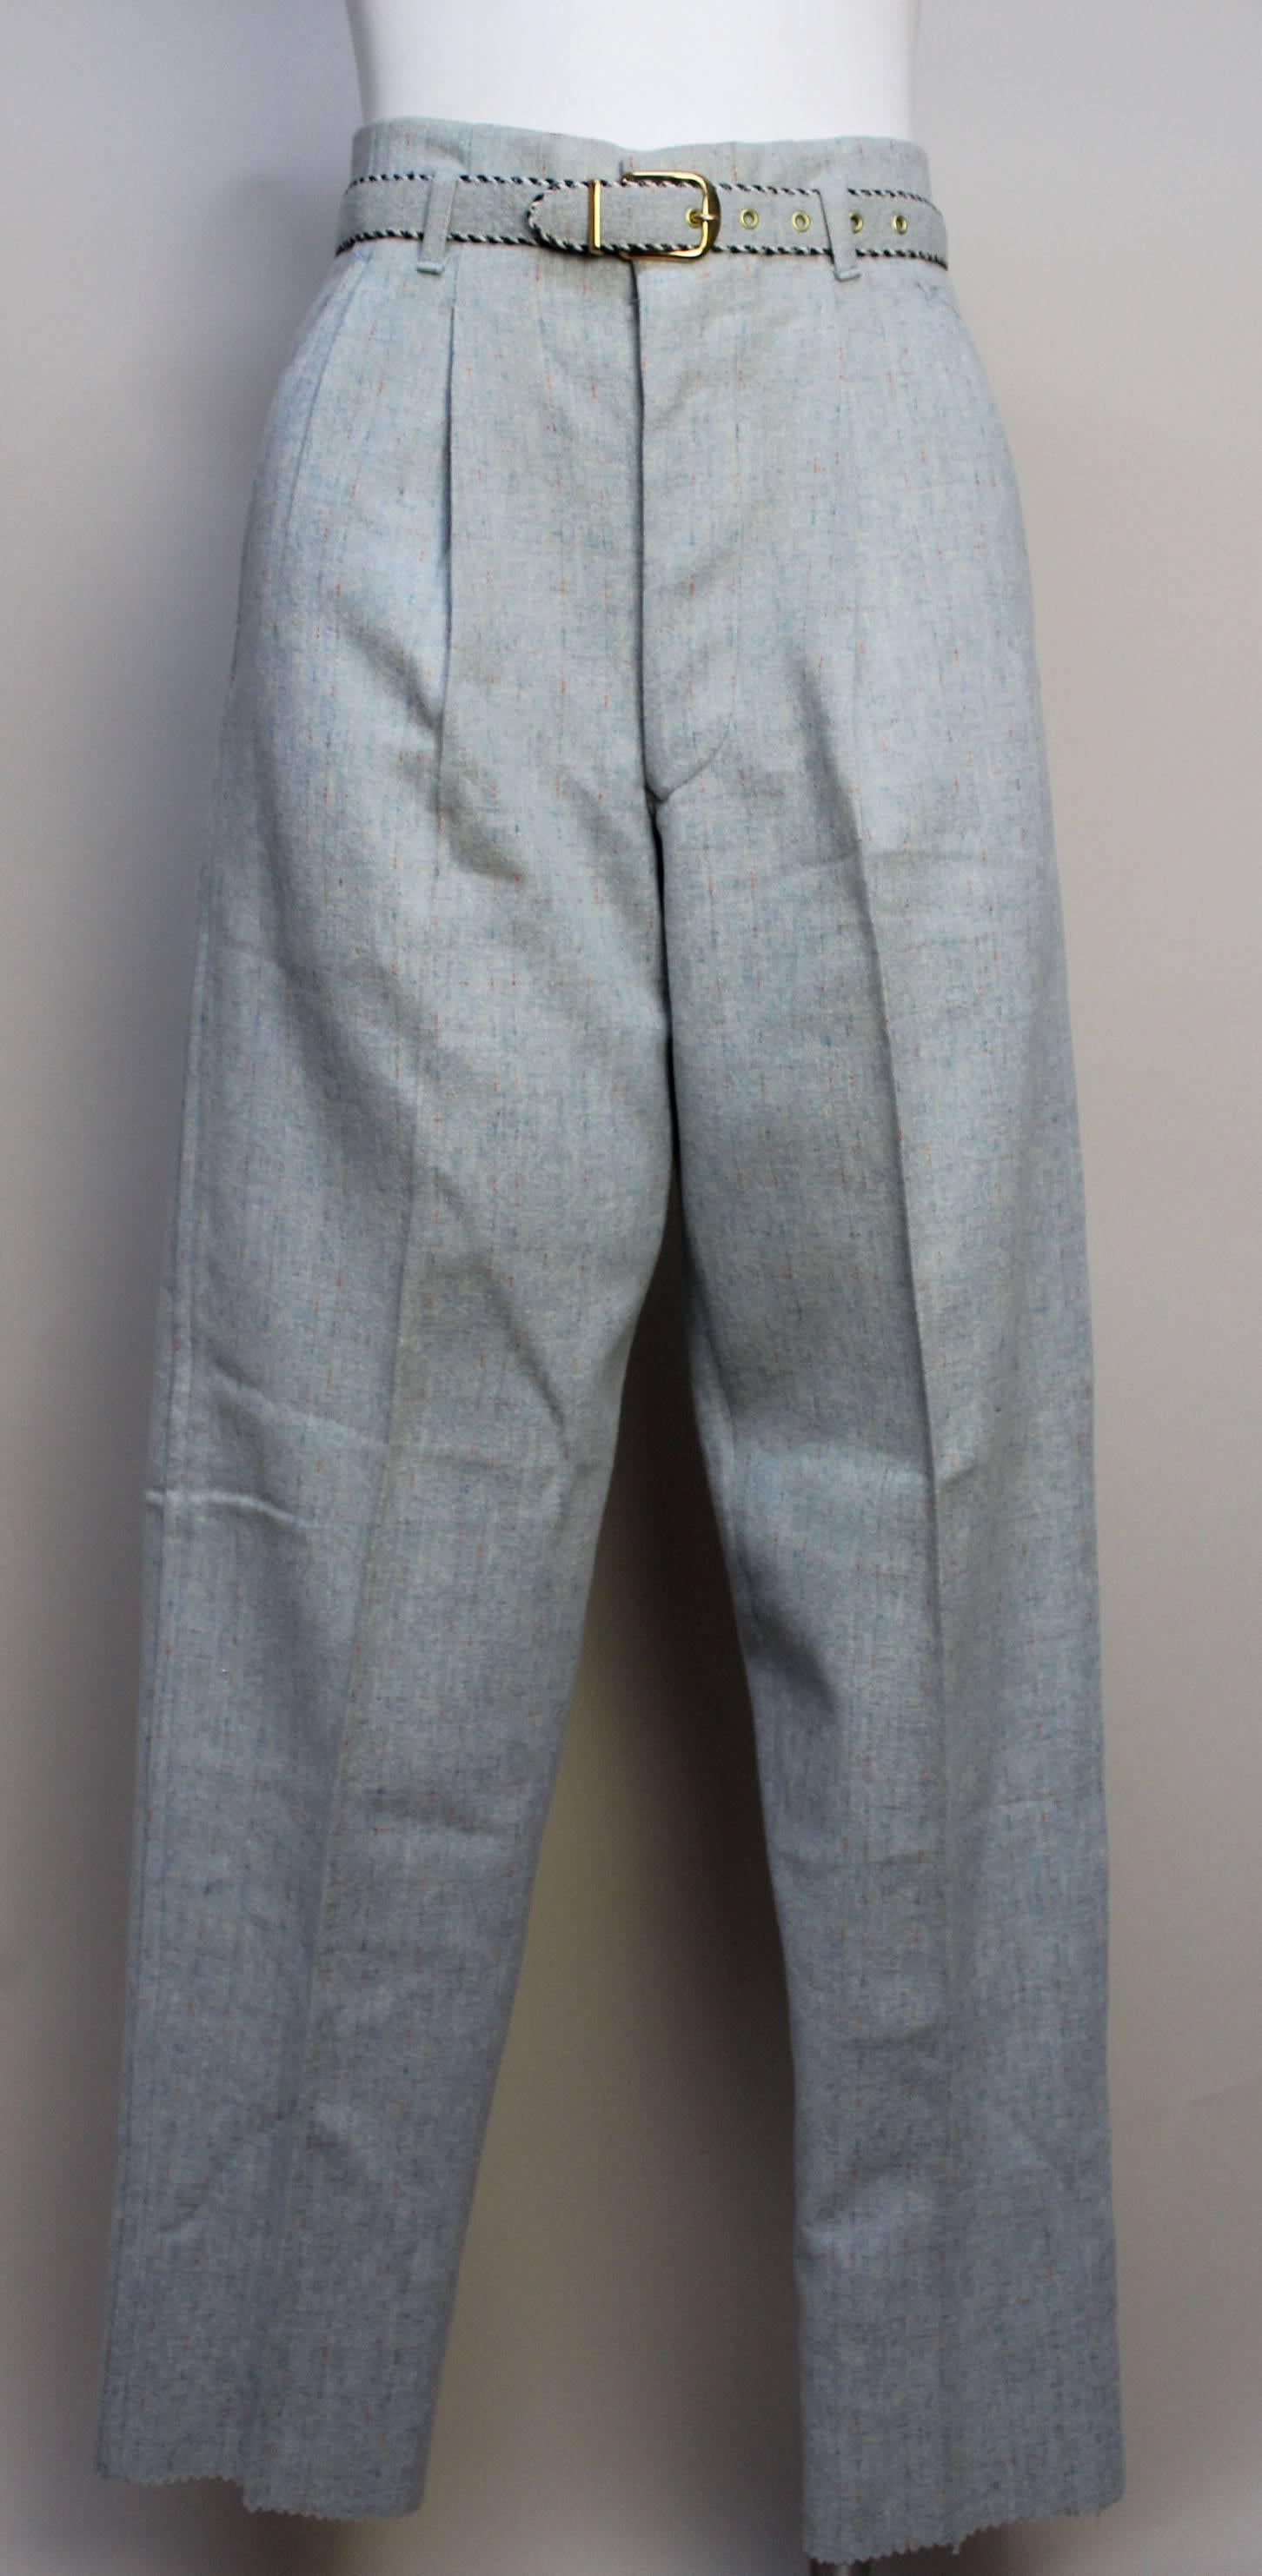 These mens pants are an amazing find! They are a rare example of early 1950's mens 